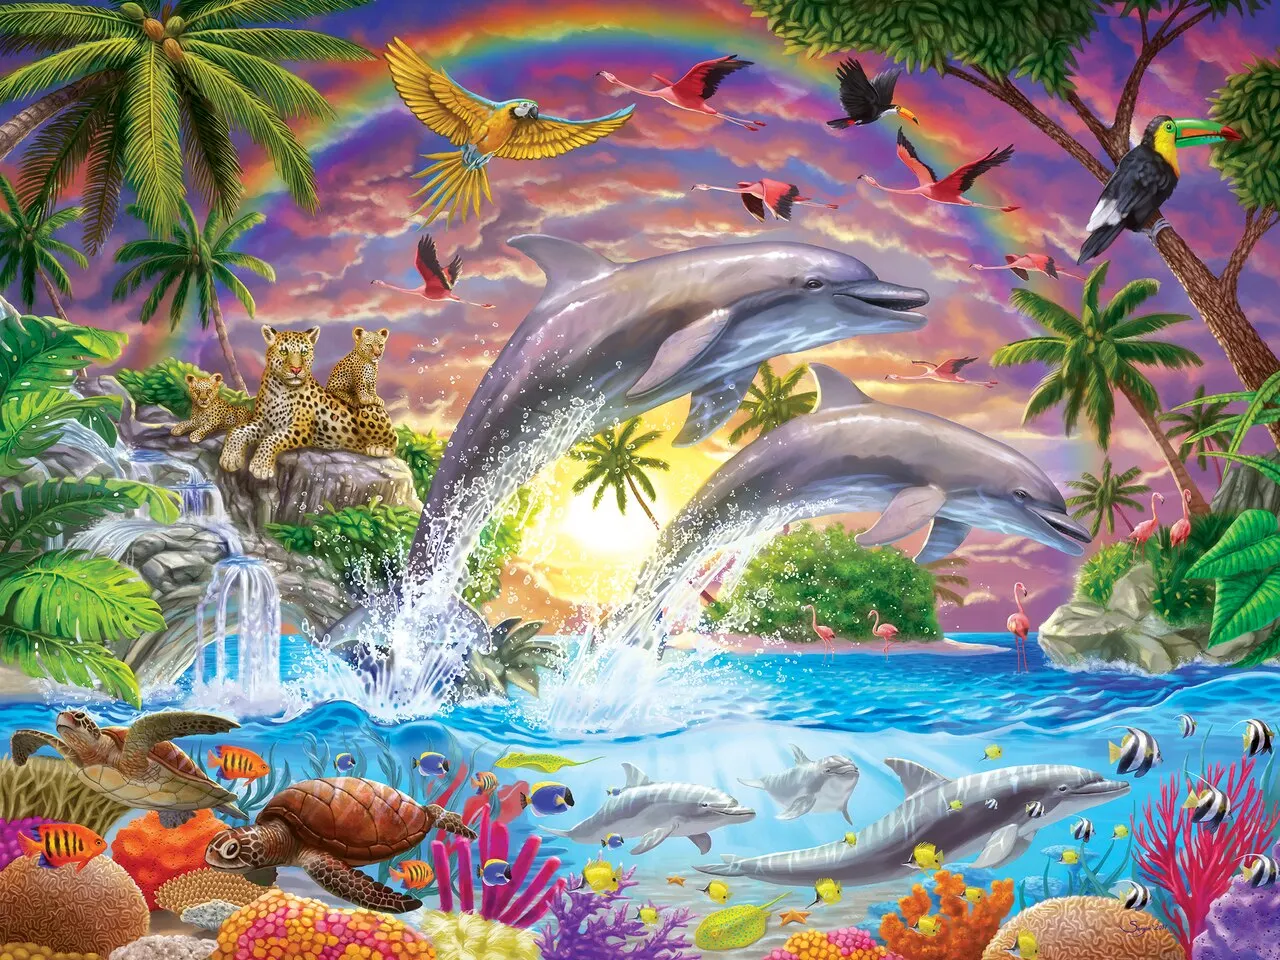 

JOHNSON Fantasy Isle Dolphins Rock Tree Sea Ocean Rainbow Turtle backdrops High quality Computer print party background